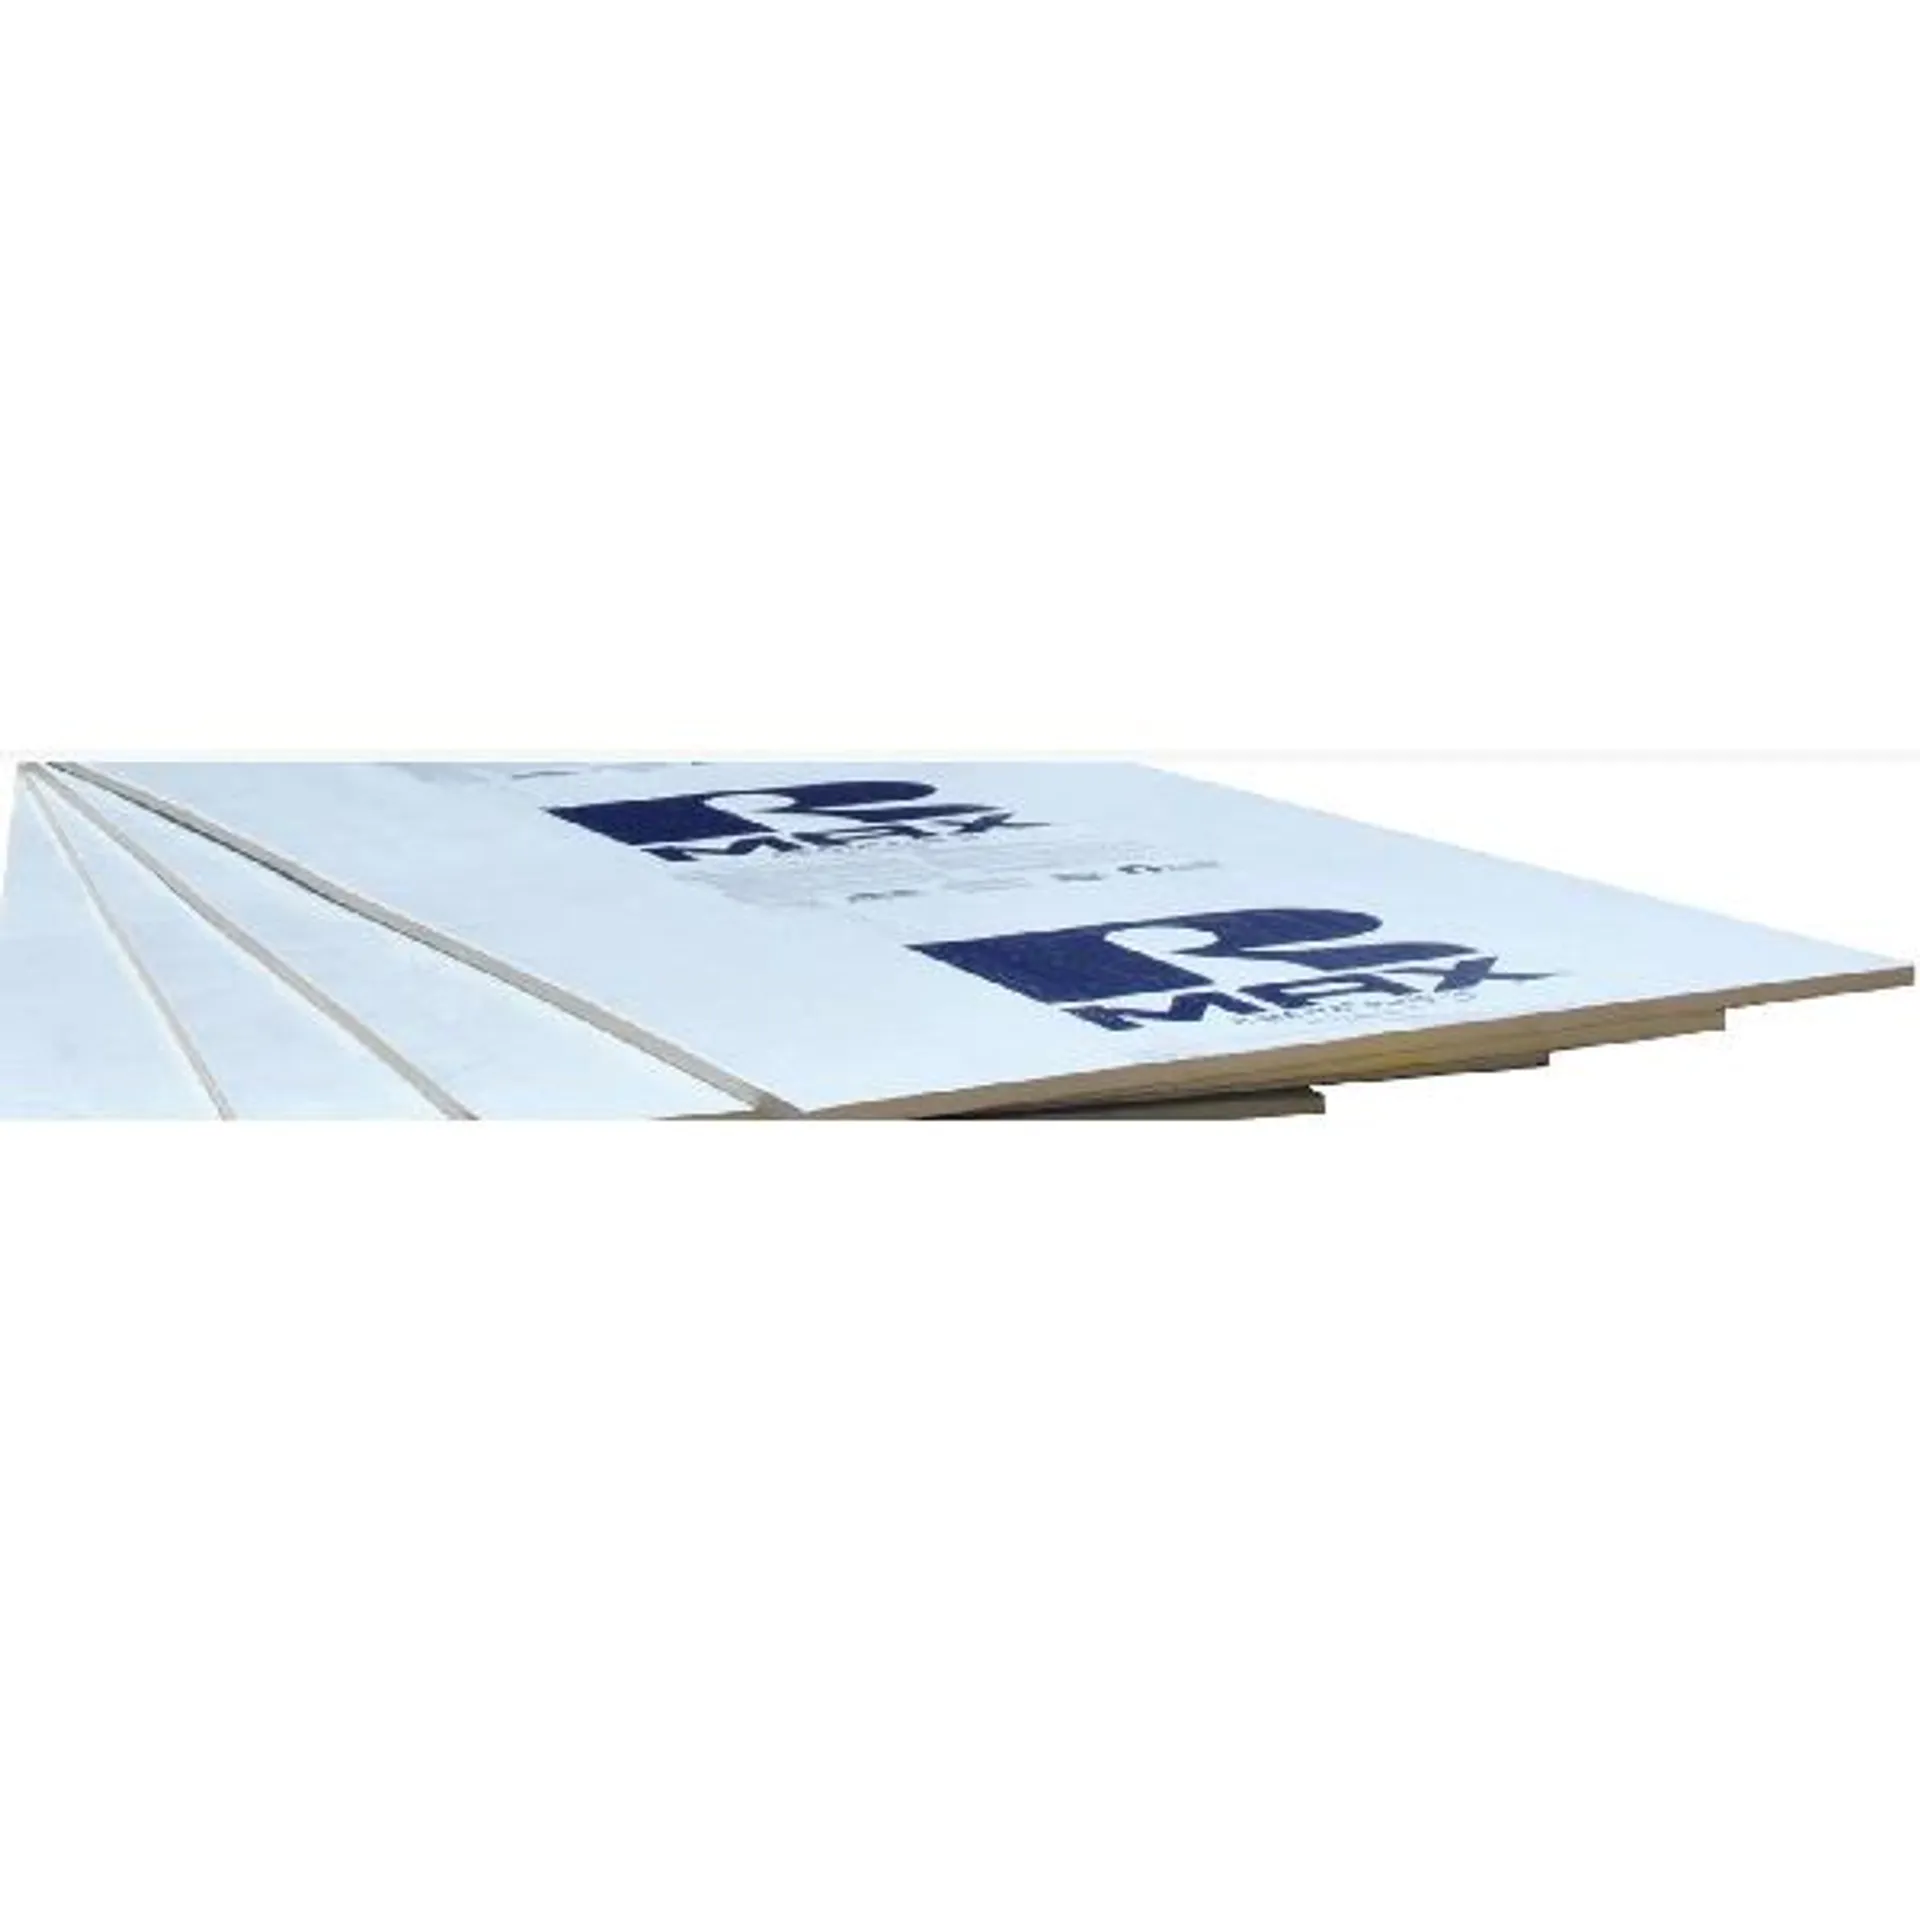 R-Matte Series RMP005 Building Envelope Insulation, 8 ft L, 4 ft W, 1/2 in Thick, R3.2 R-Value, Polyisocyanurate